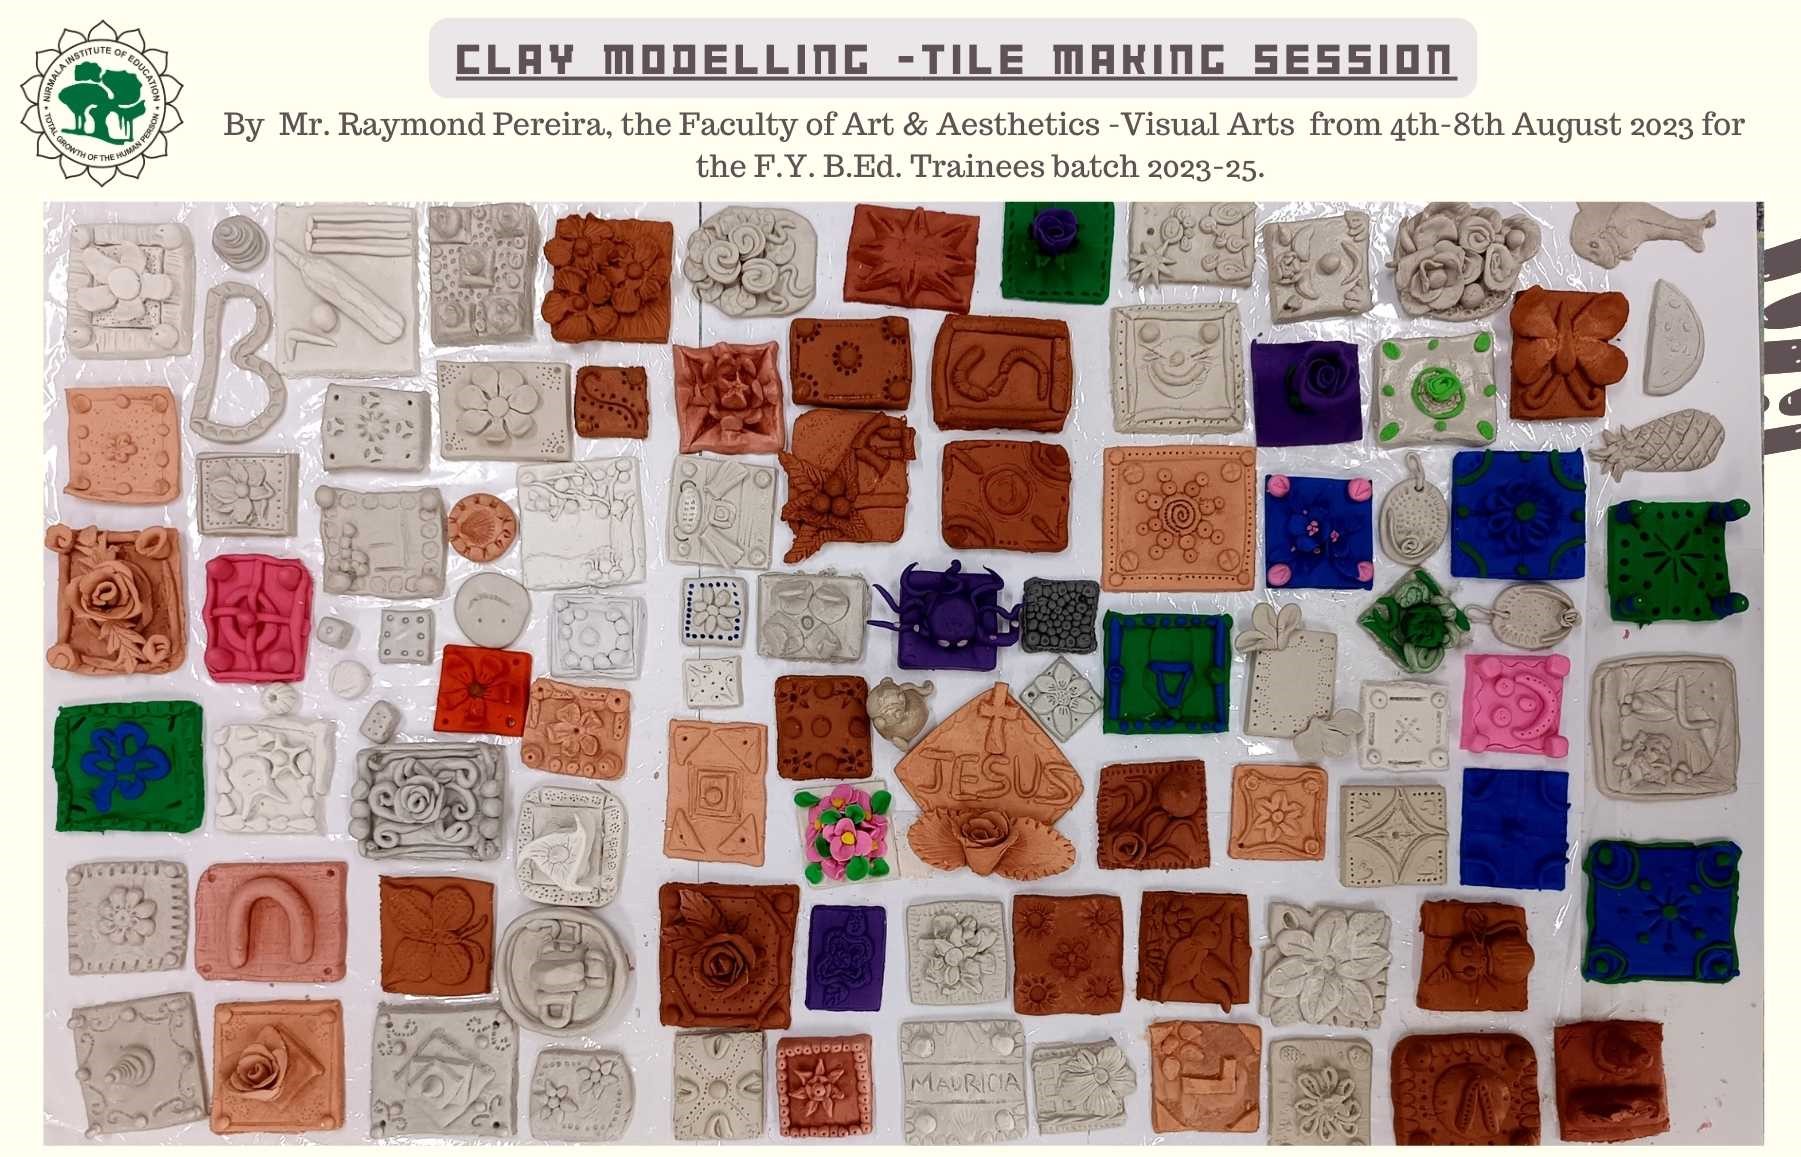 CLAY MODELLING -TILE MAKING SESSION from 4th-8th August 2023